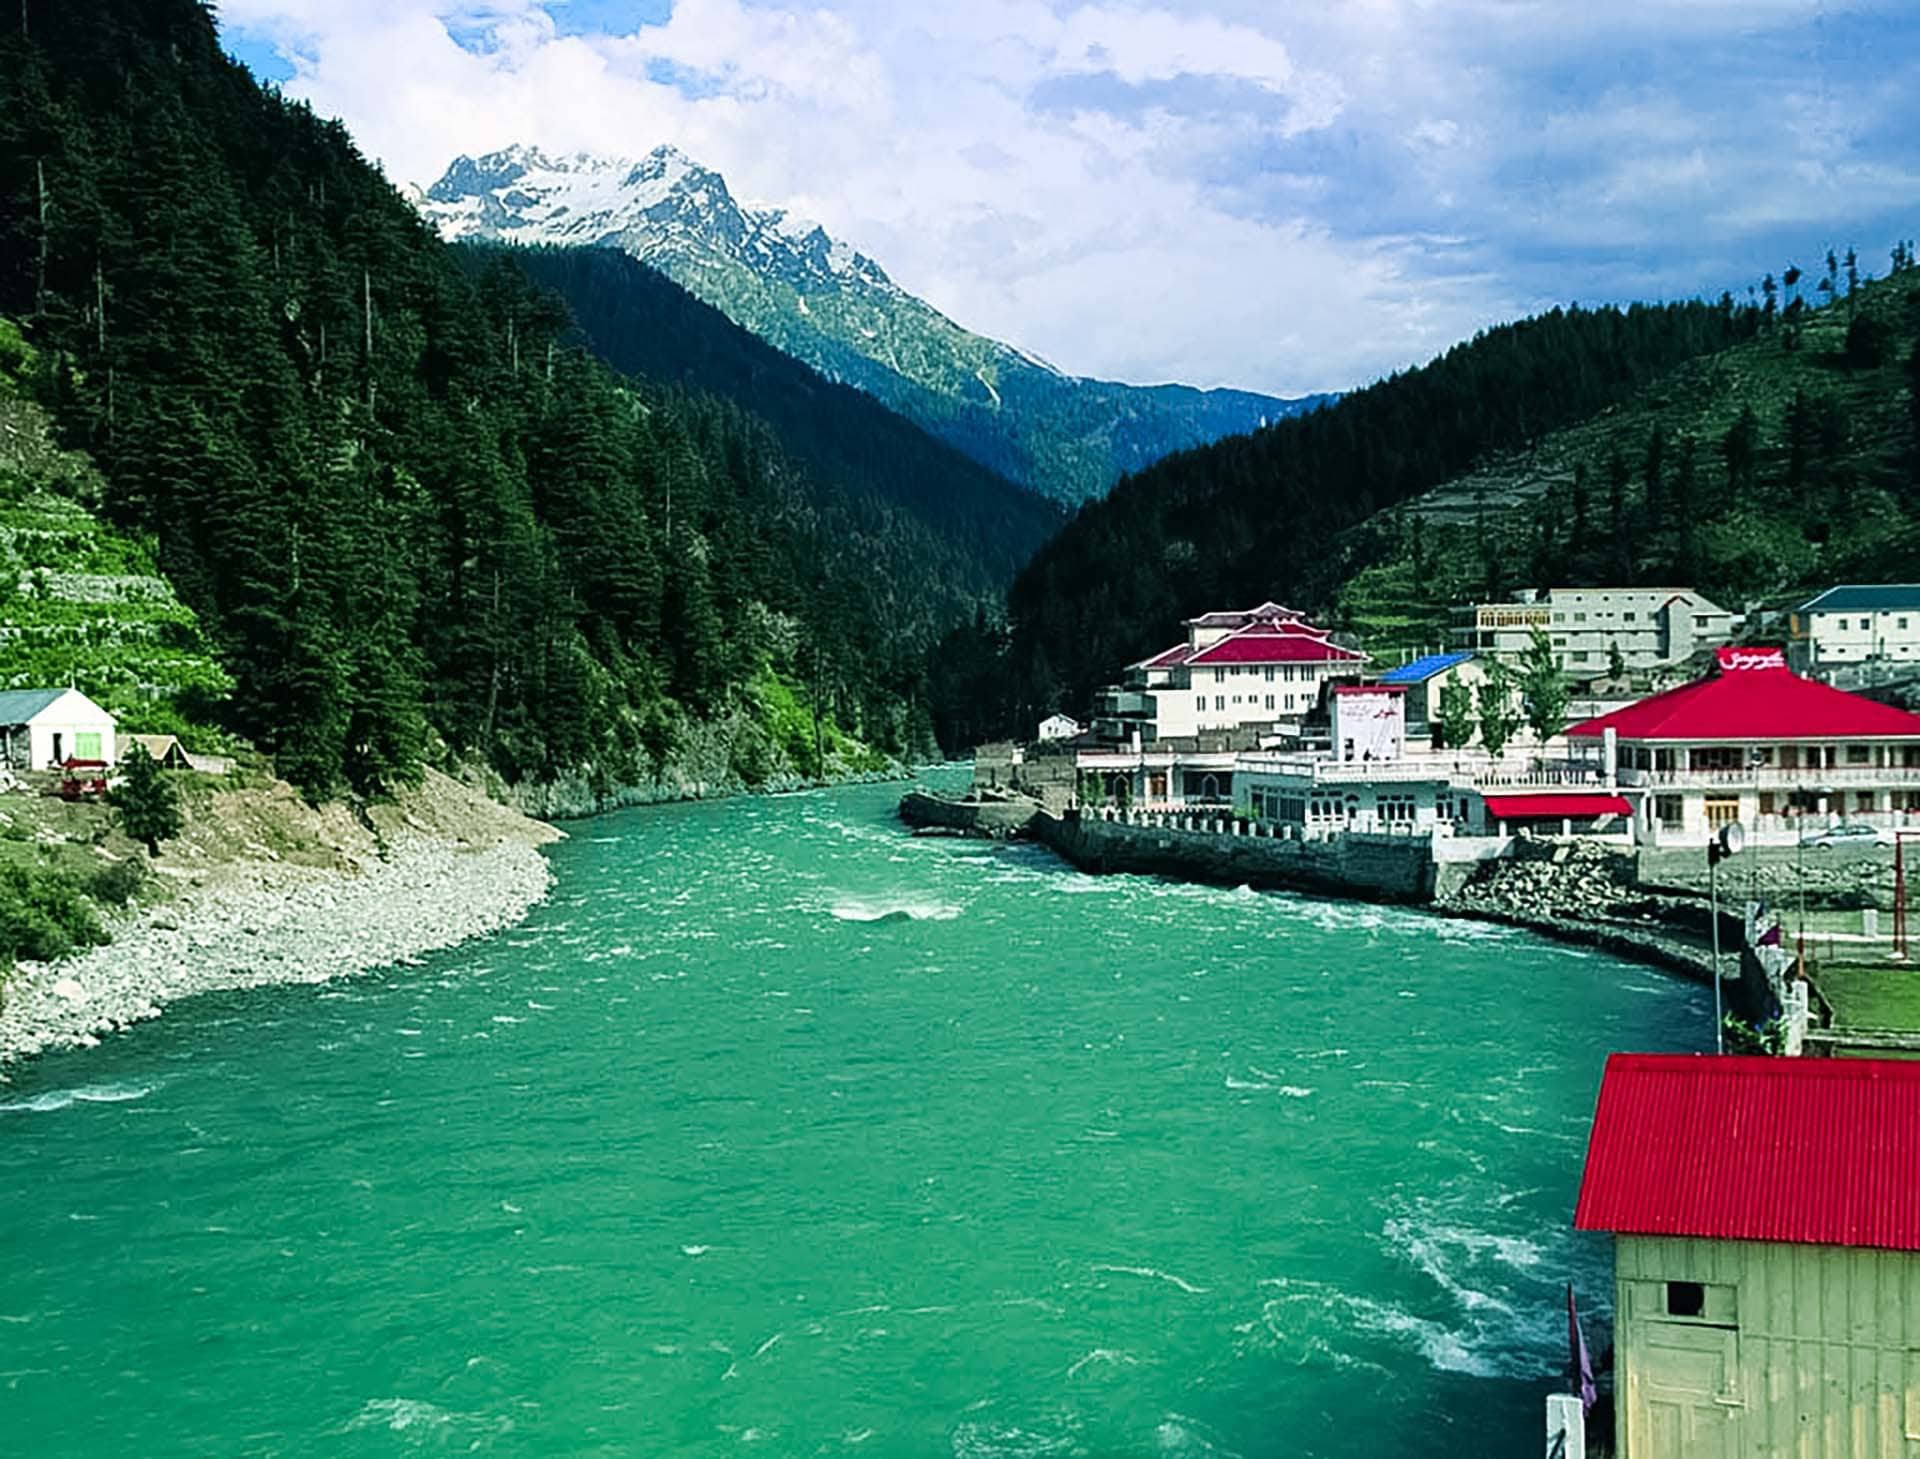 Day 04: Explore Swat Valley - A Canvas of Natural Splendor